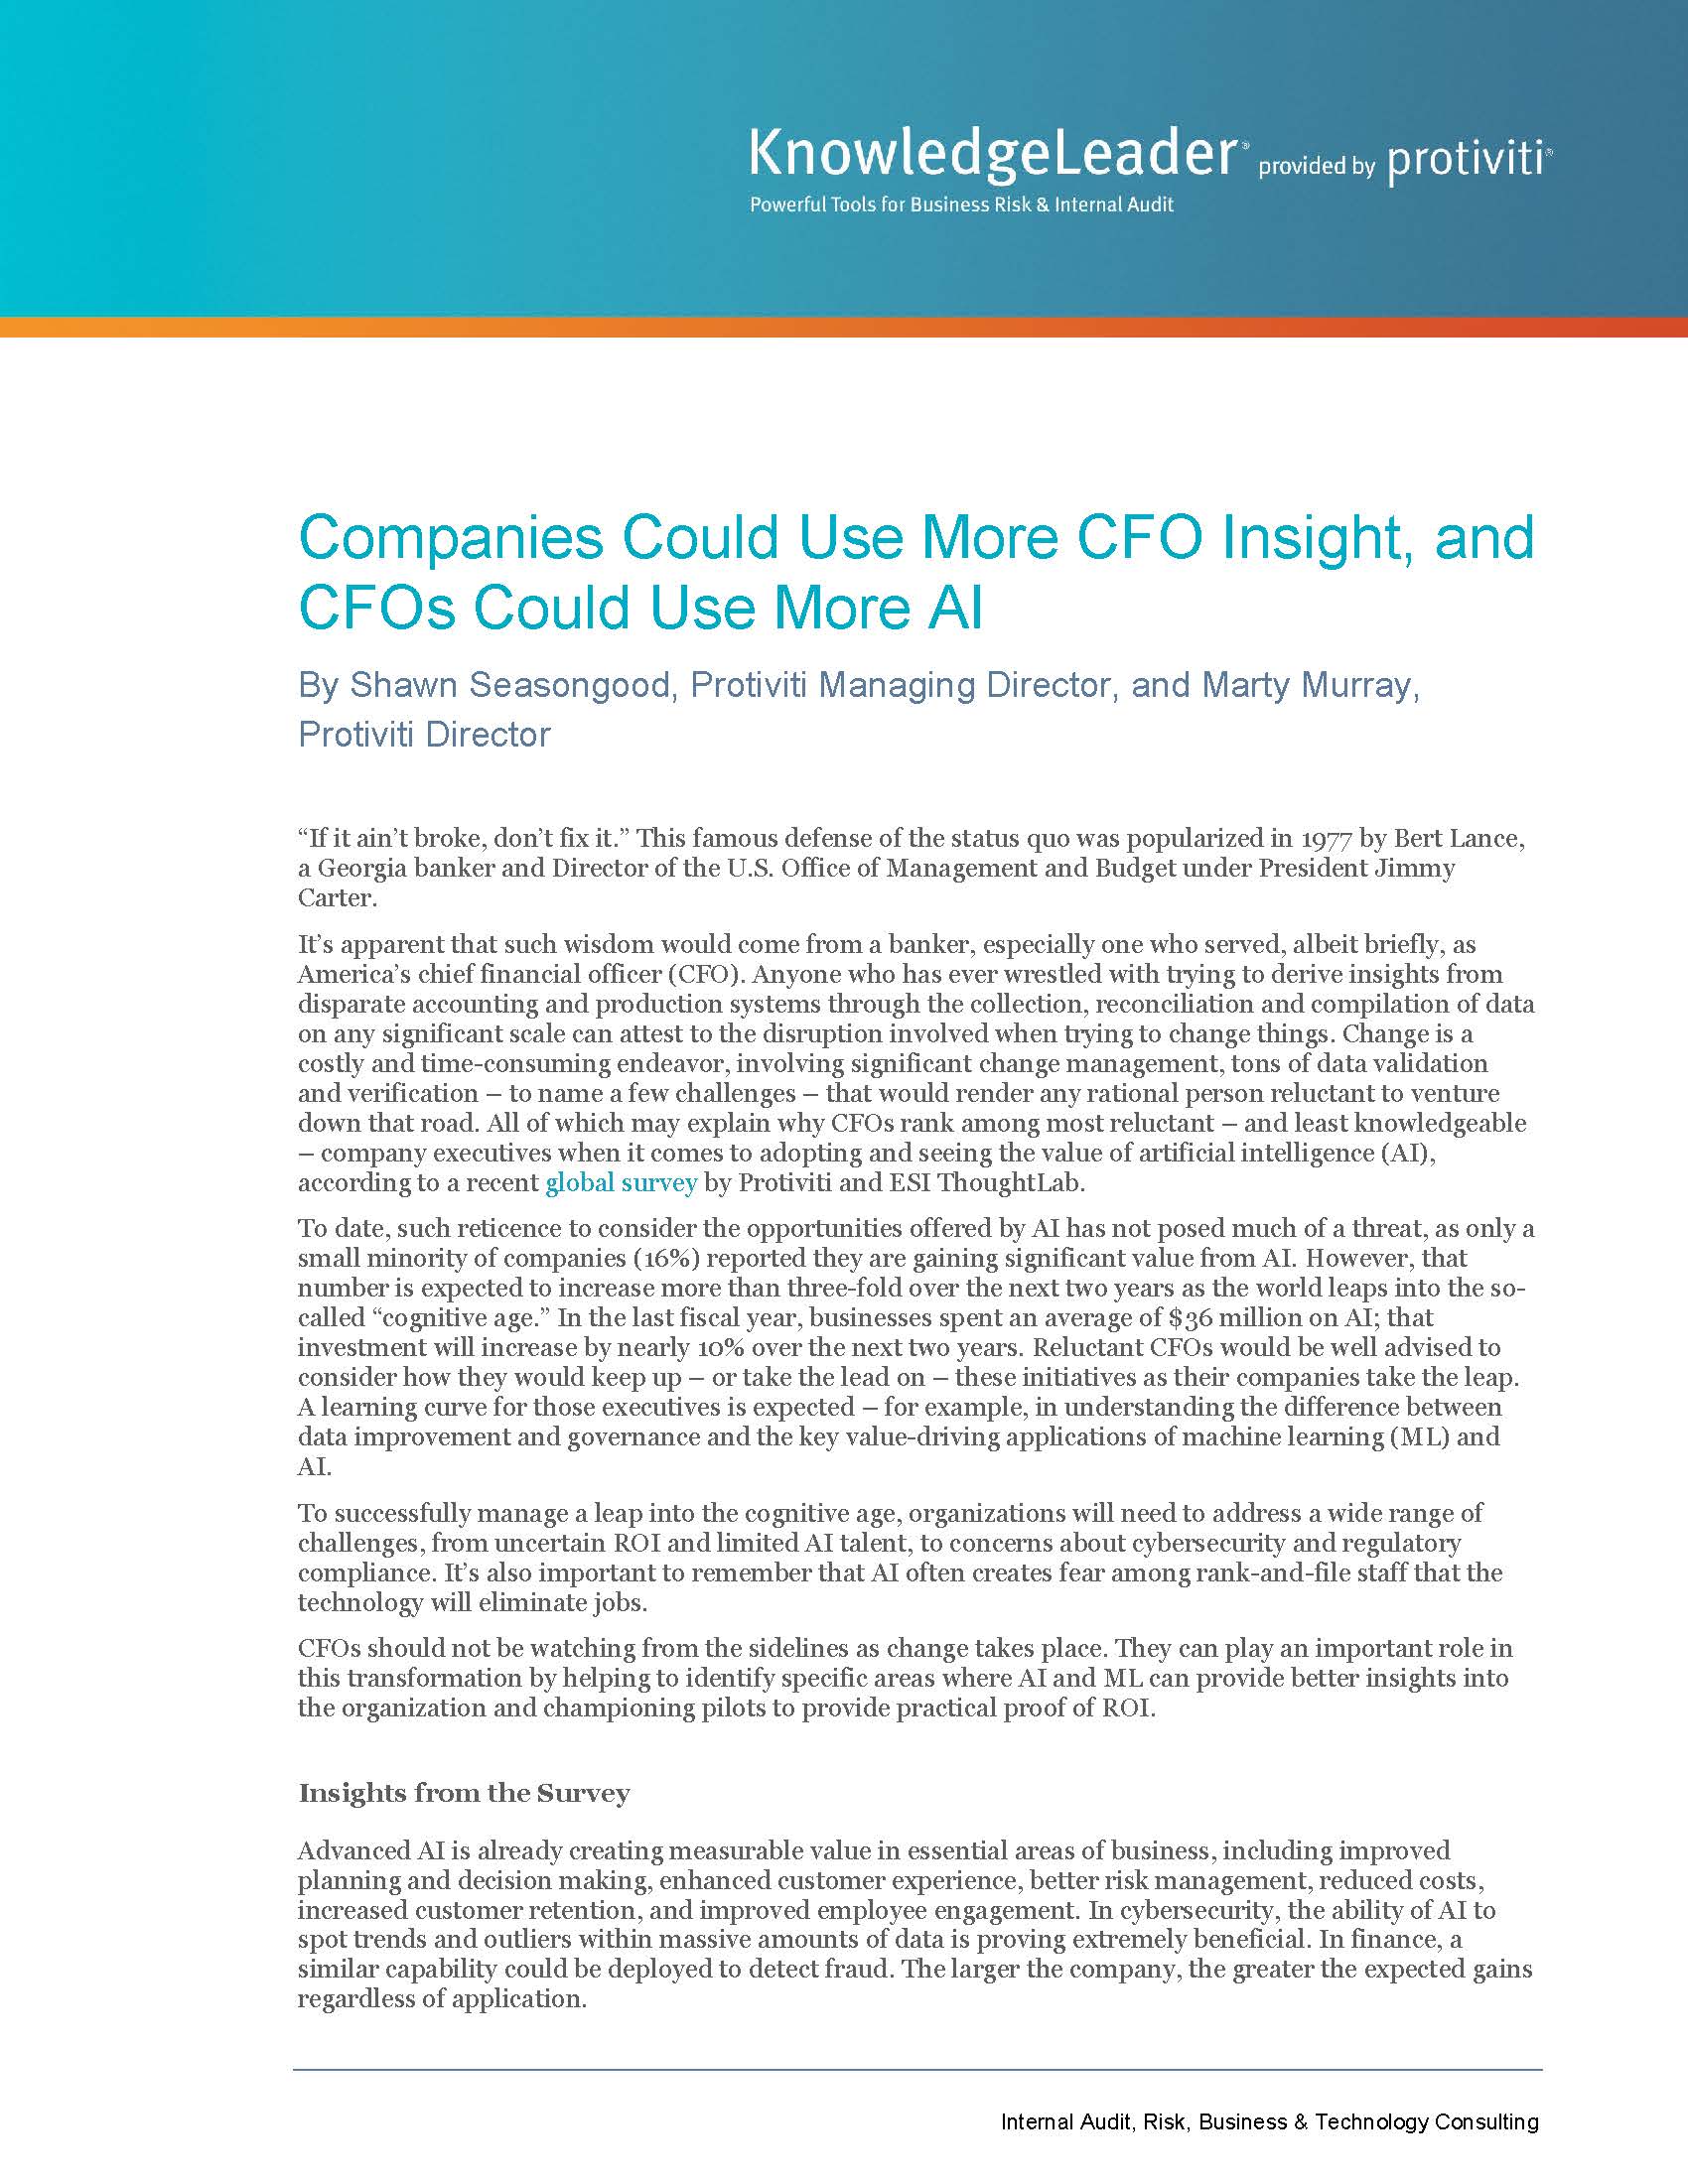 Screenshot of the first page of Companies Could Use More CFO Insight, and CFOs Could Use More AI